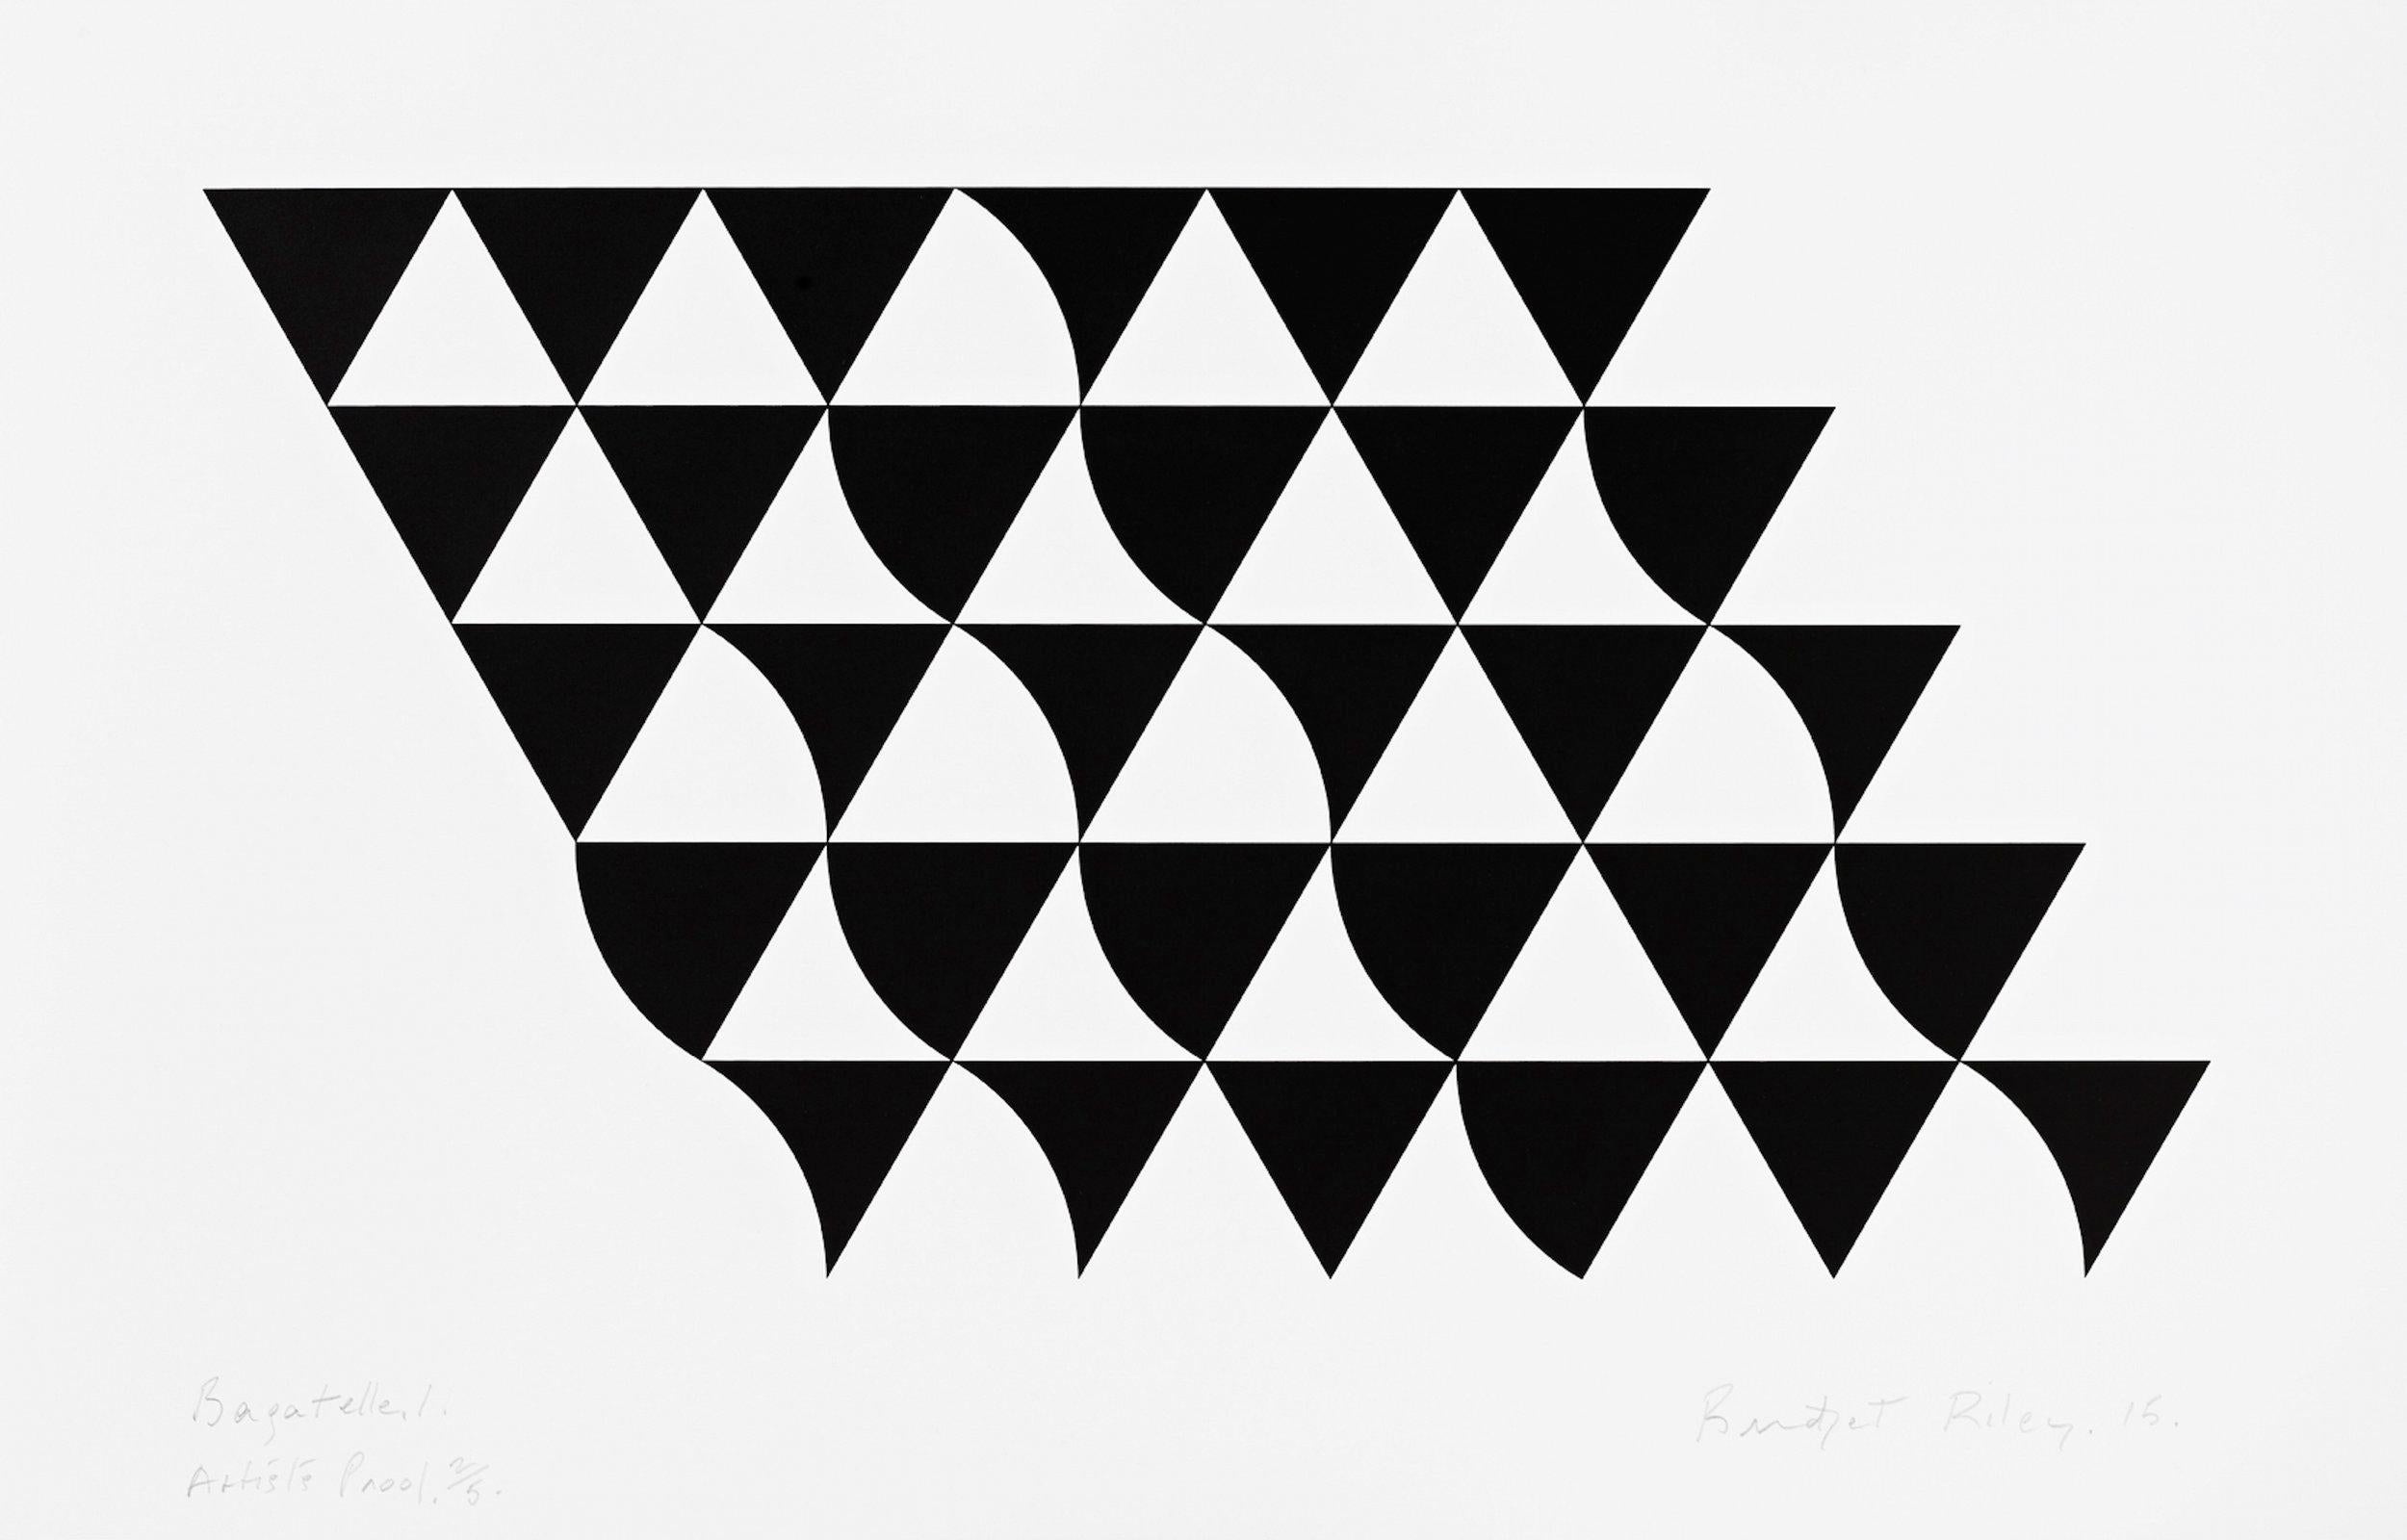 BRIDGET RILEY
Bagatelle 1, 2015
Screenprint in black, on wove
Signed, titled, dated and numbered from the edition of 75
Printed by Bridget Riley Services Ltd, London
Published by the artist
Image: 36.0 x 66.8 cm (14.2 x 26.4 in)
Sheet: 52.5 x 82.0